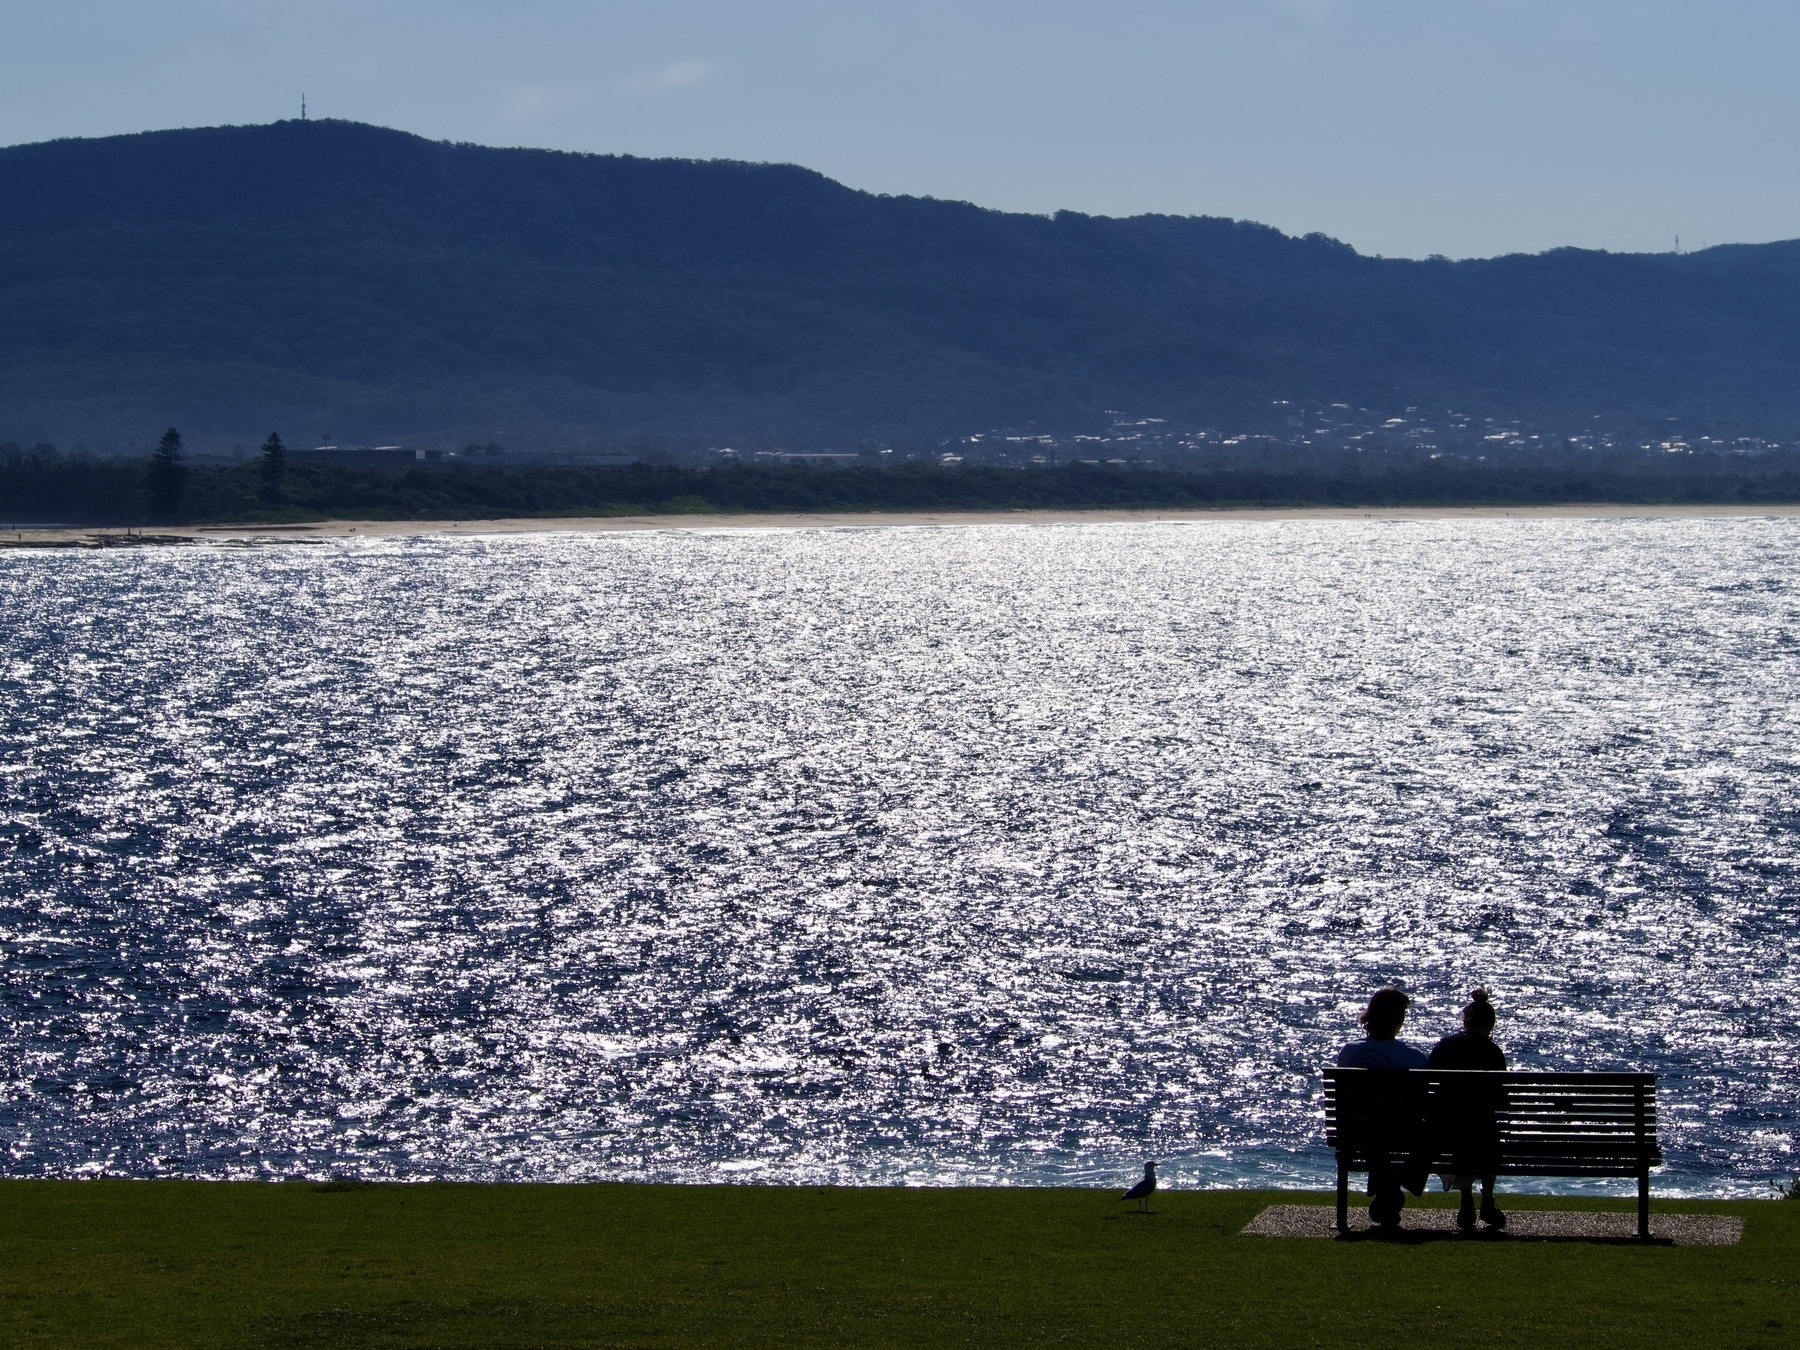 A couple sits on a bench next to a seagull, overlooking a shimmering ocean with a city and mountain escarpment in the distance.